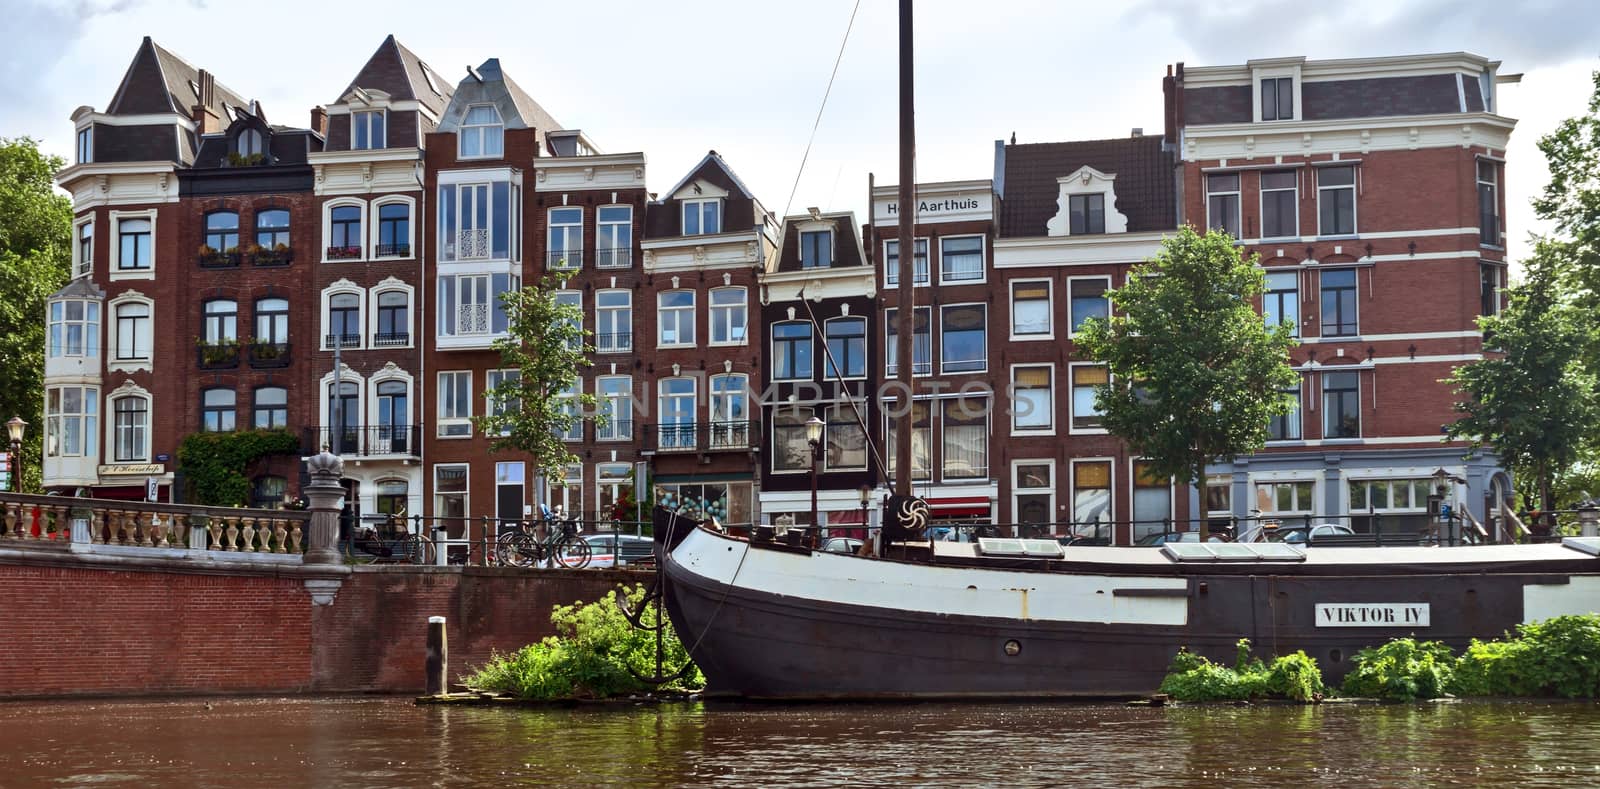 Amsterdam - Canals and typical dutch houses by Venakr